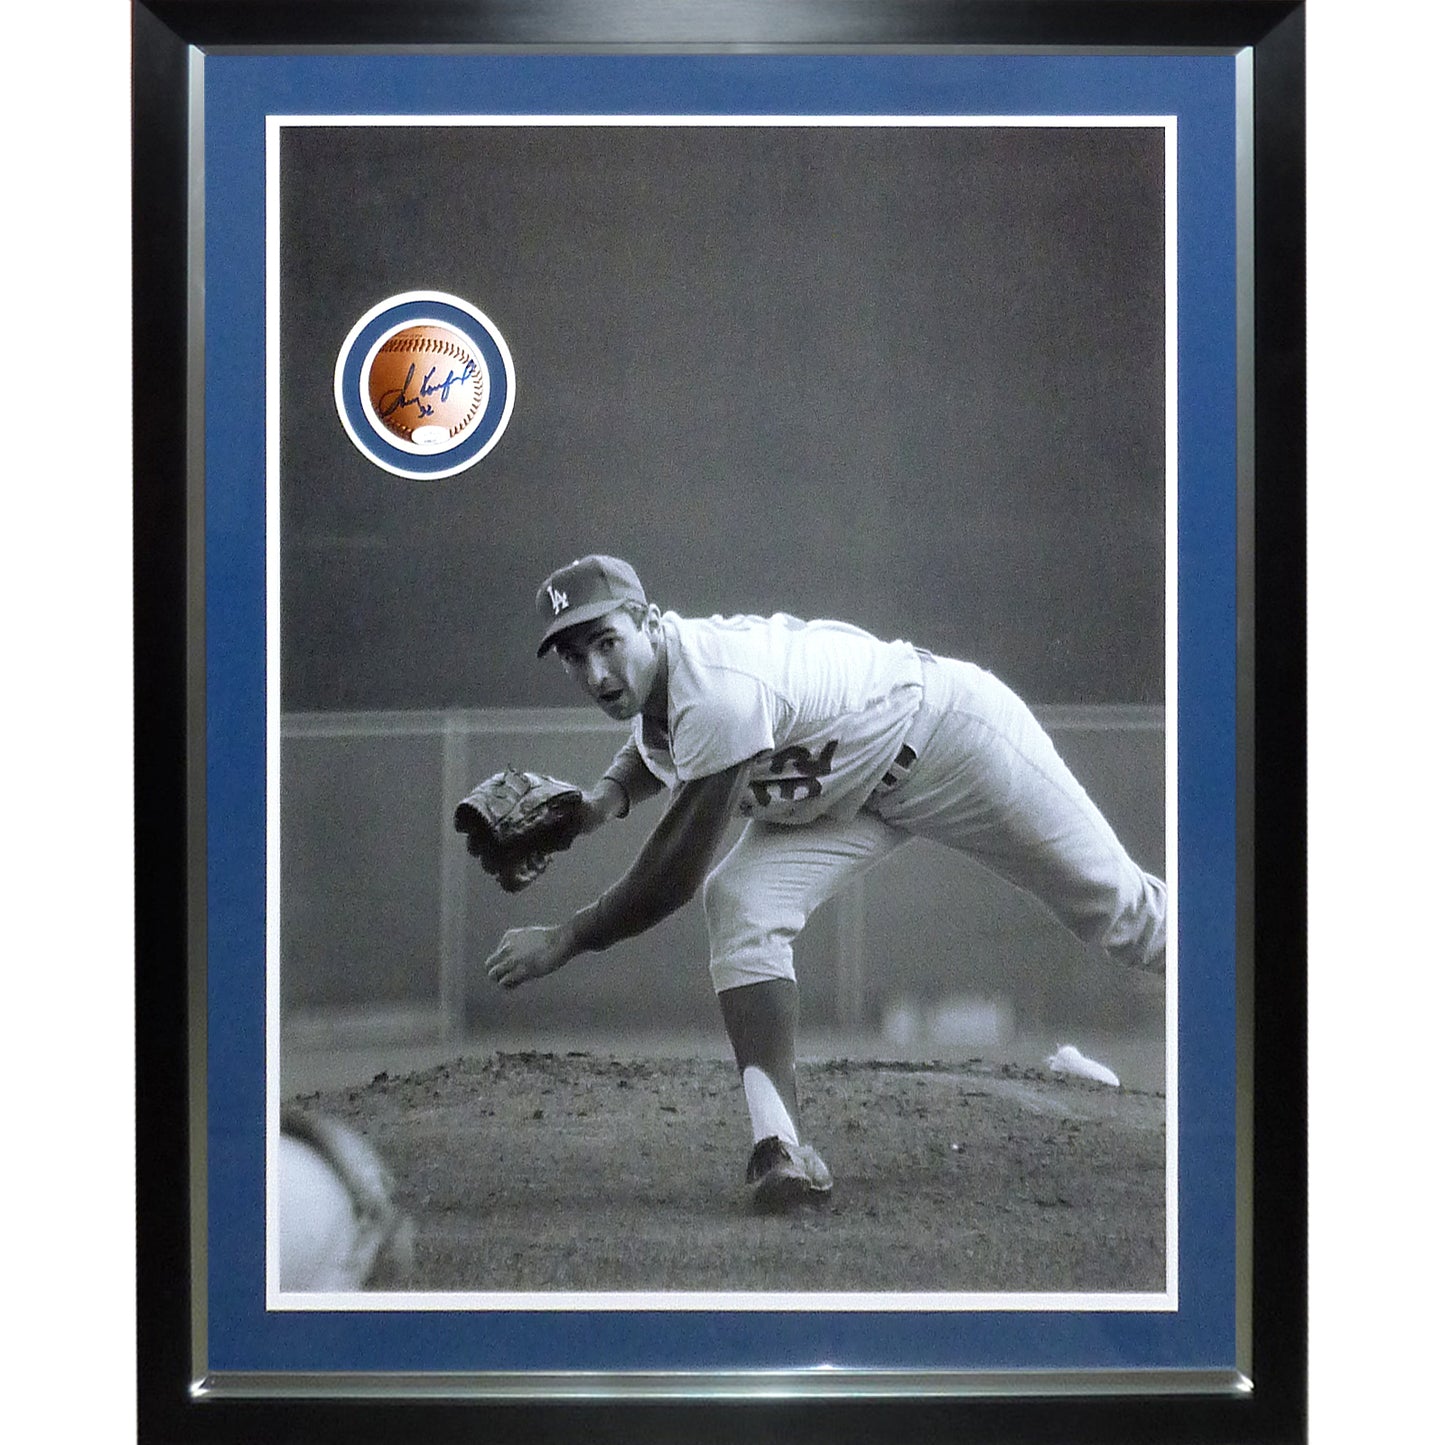 Sandy Koufax Deluxe Full-Size Artwork Poster Framed with Baseball Circle Autograph – JSA